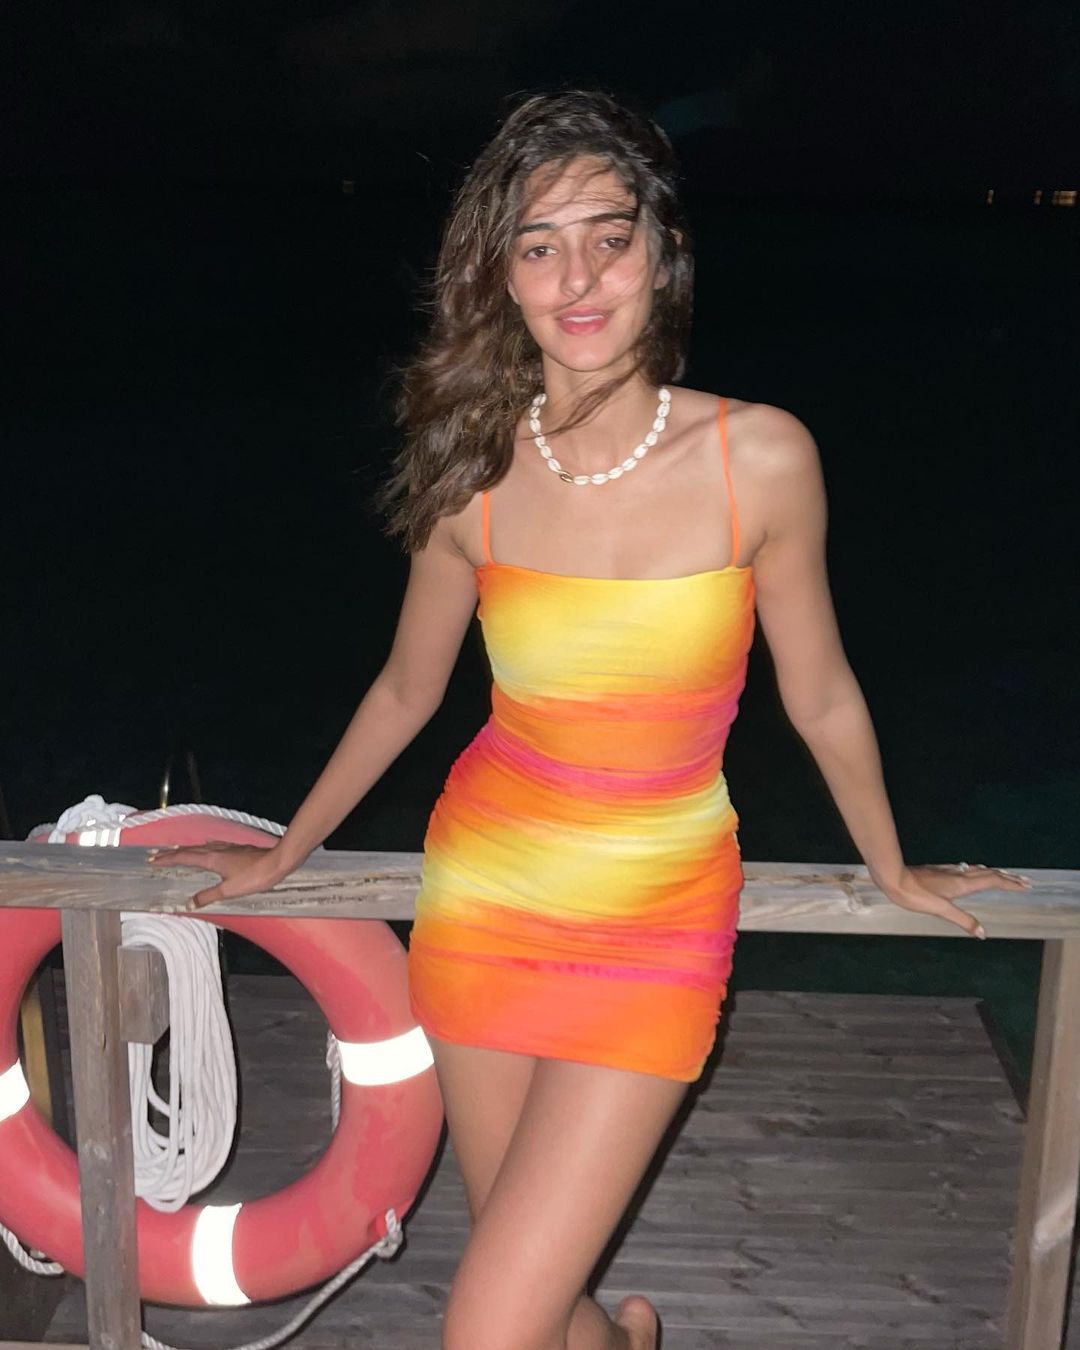 Ananya Panday flaunts her figure in the bodycon dress